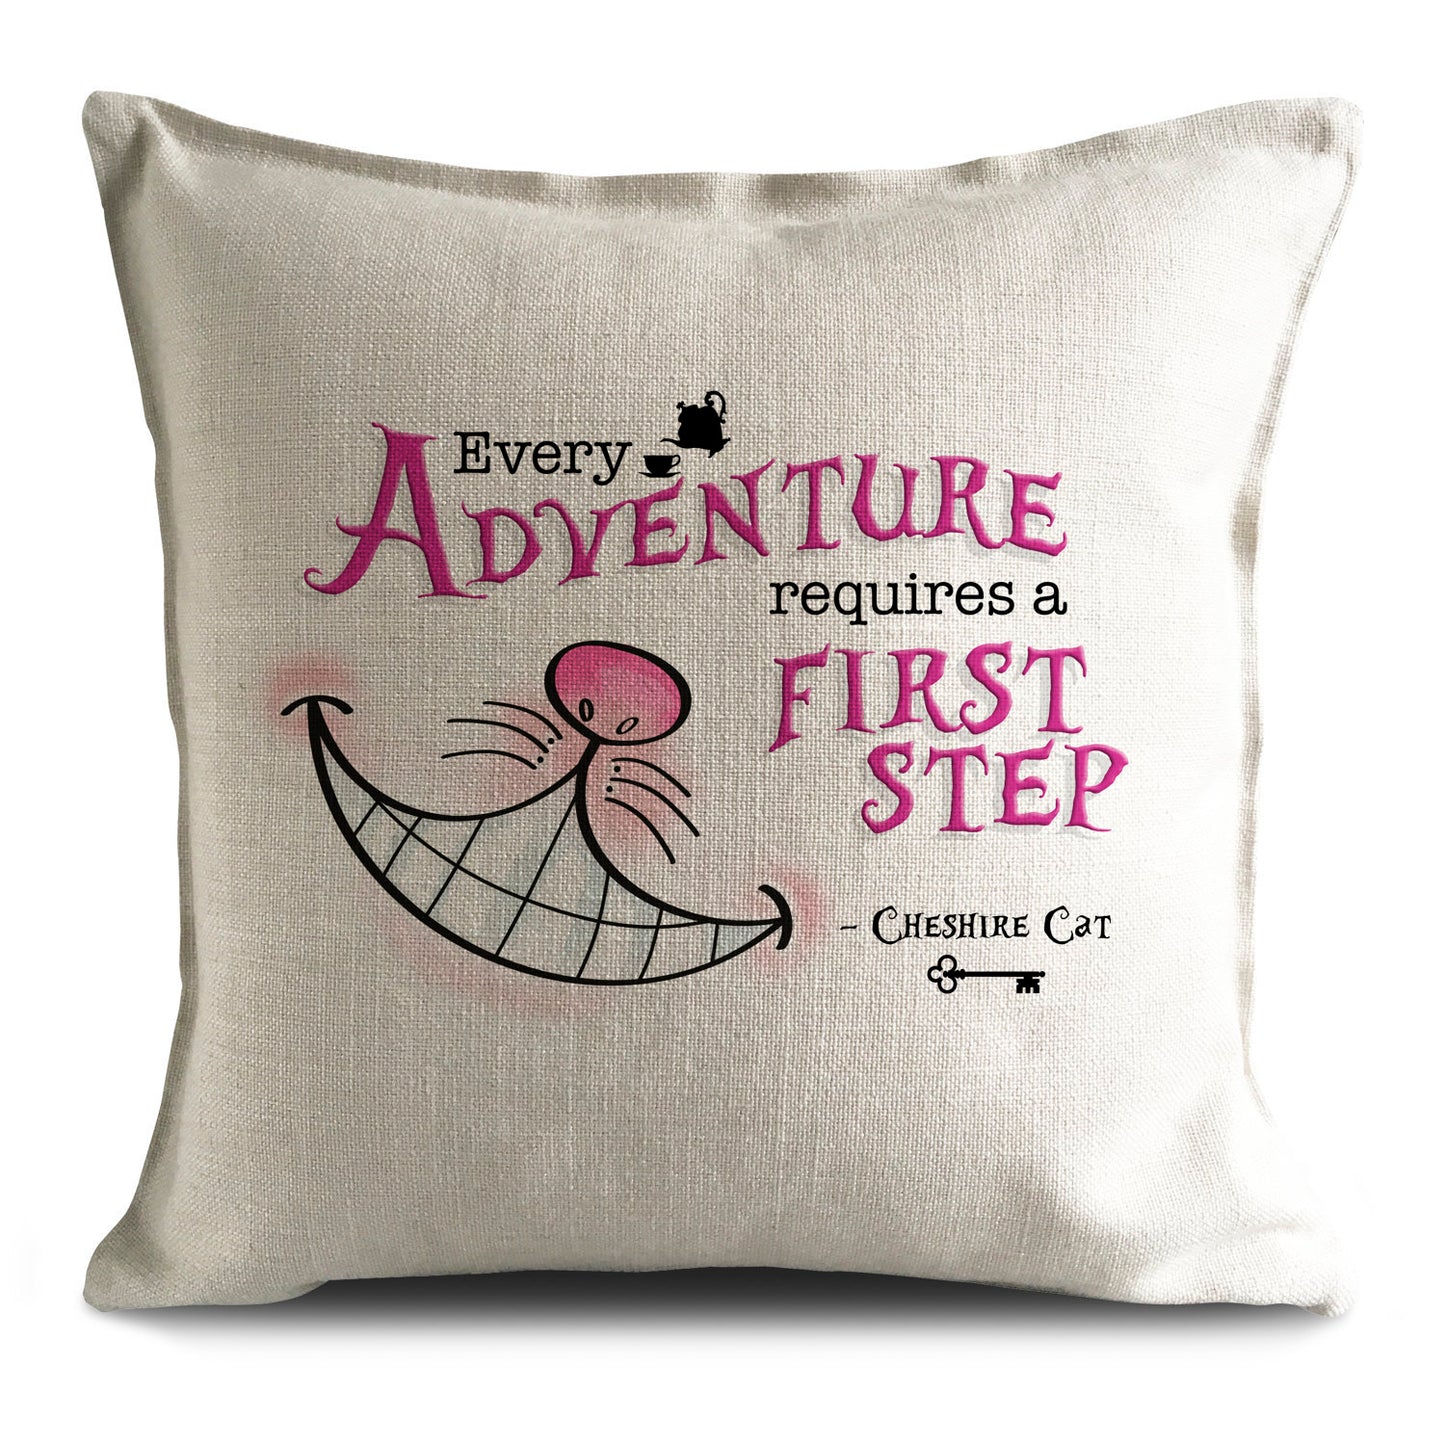 Alice in wonderland cushion cover with Cheshire Cat every adventure quote